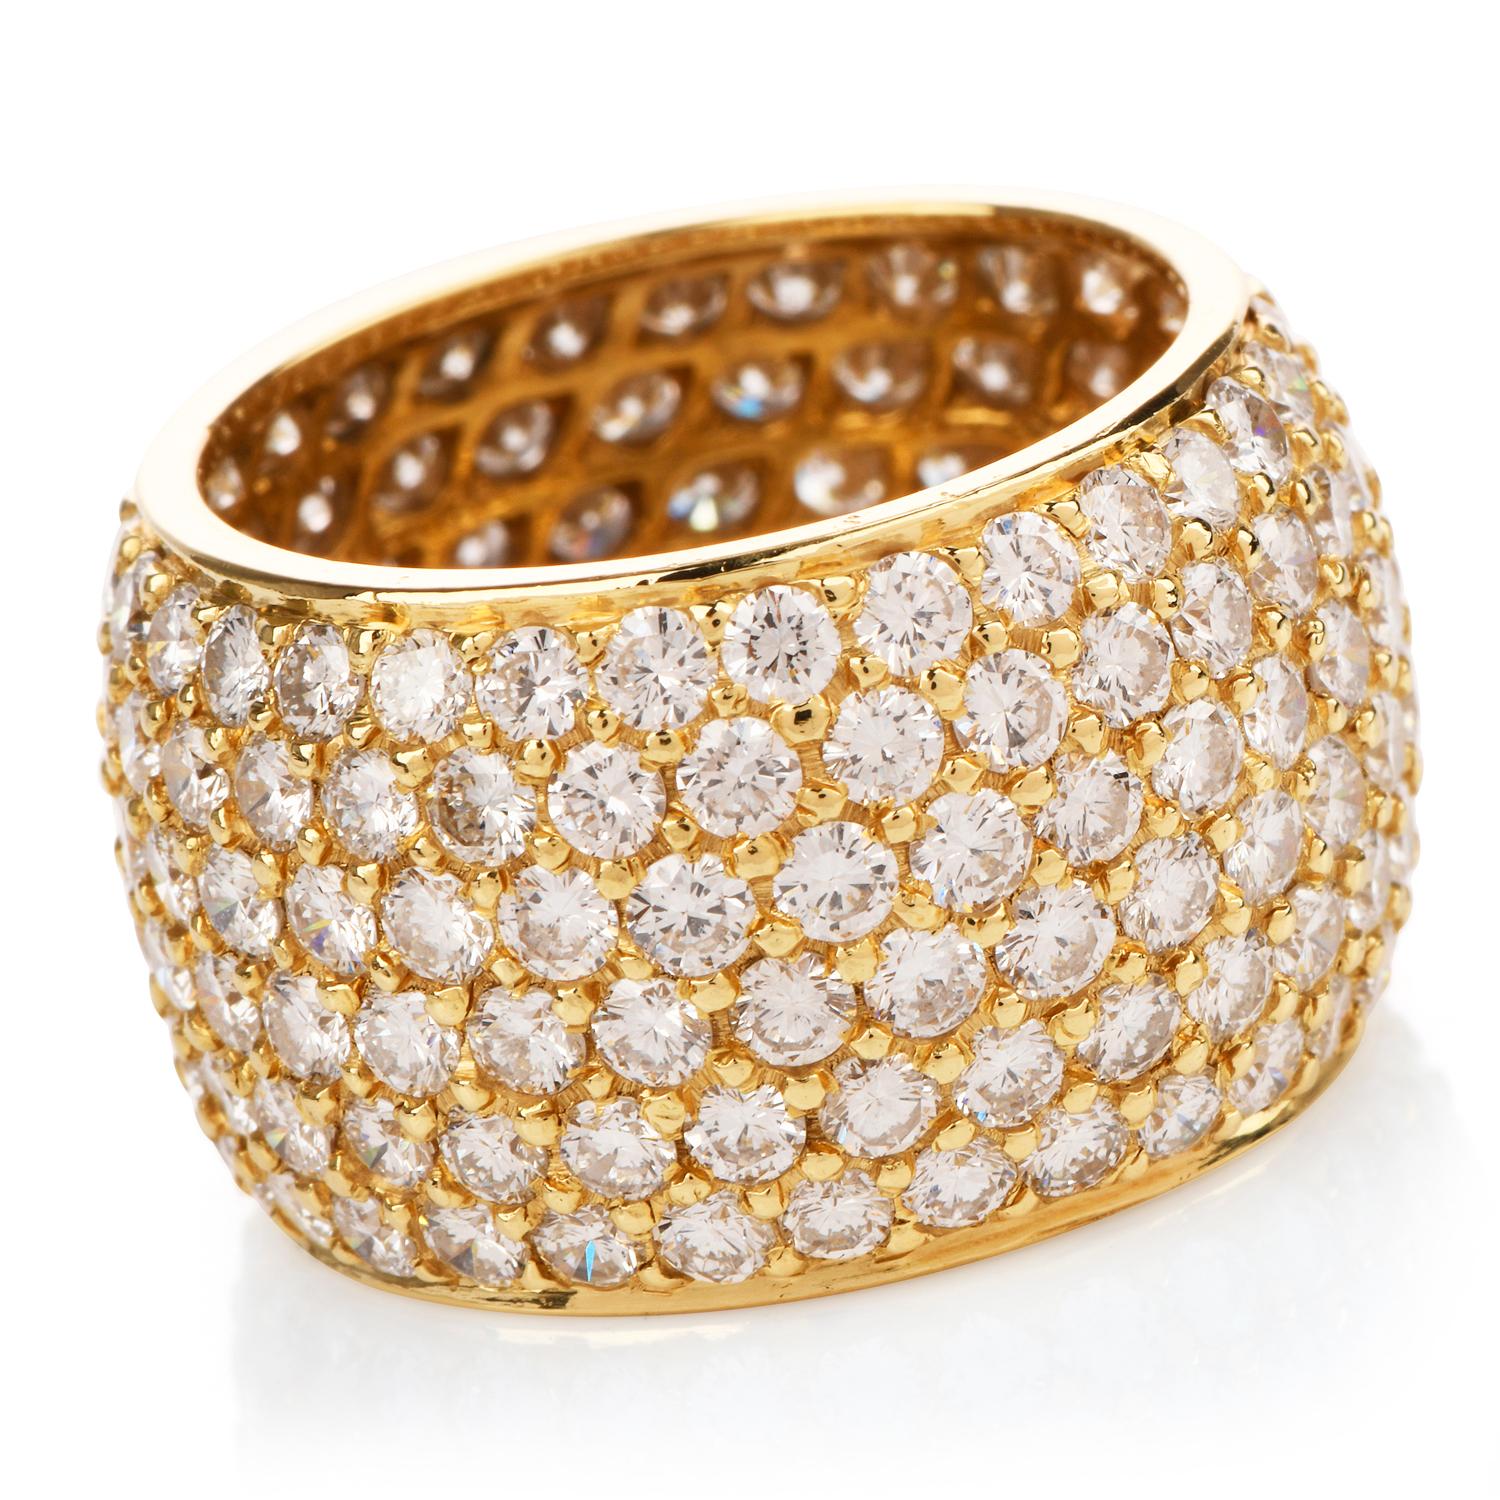 This Stylish diamond eternity ring is crafted in solid 18-karat yellow gold, weighing 8.0 grams and measuring 13mm x 7mm high. Pave-set with approximately 200 round-cut diamonds, collectively weighing approximately, 7.60 carats, graded G-H color and